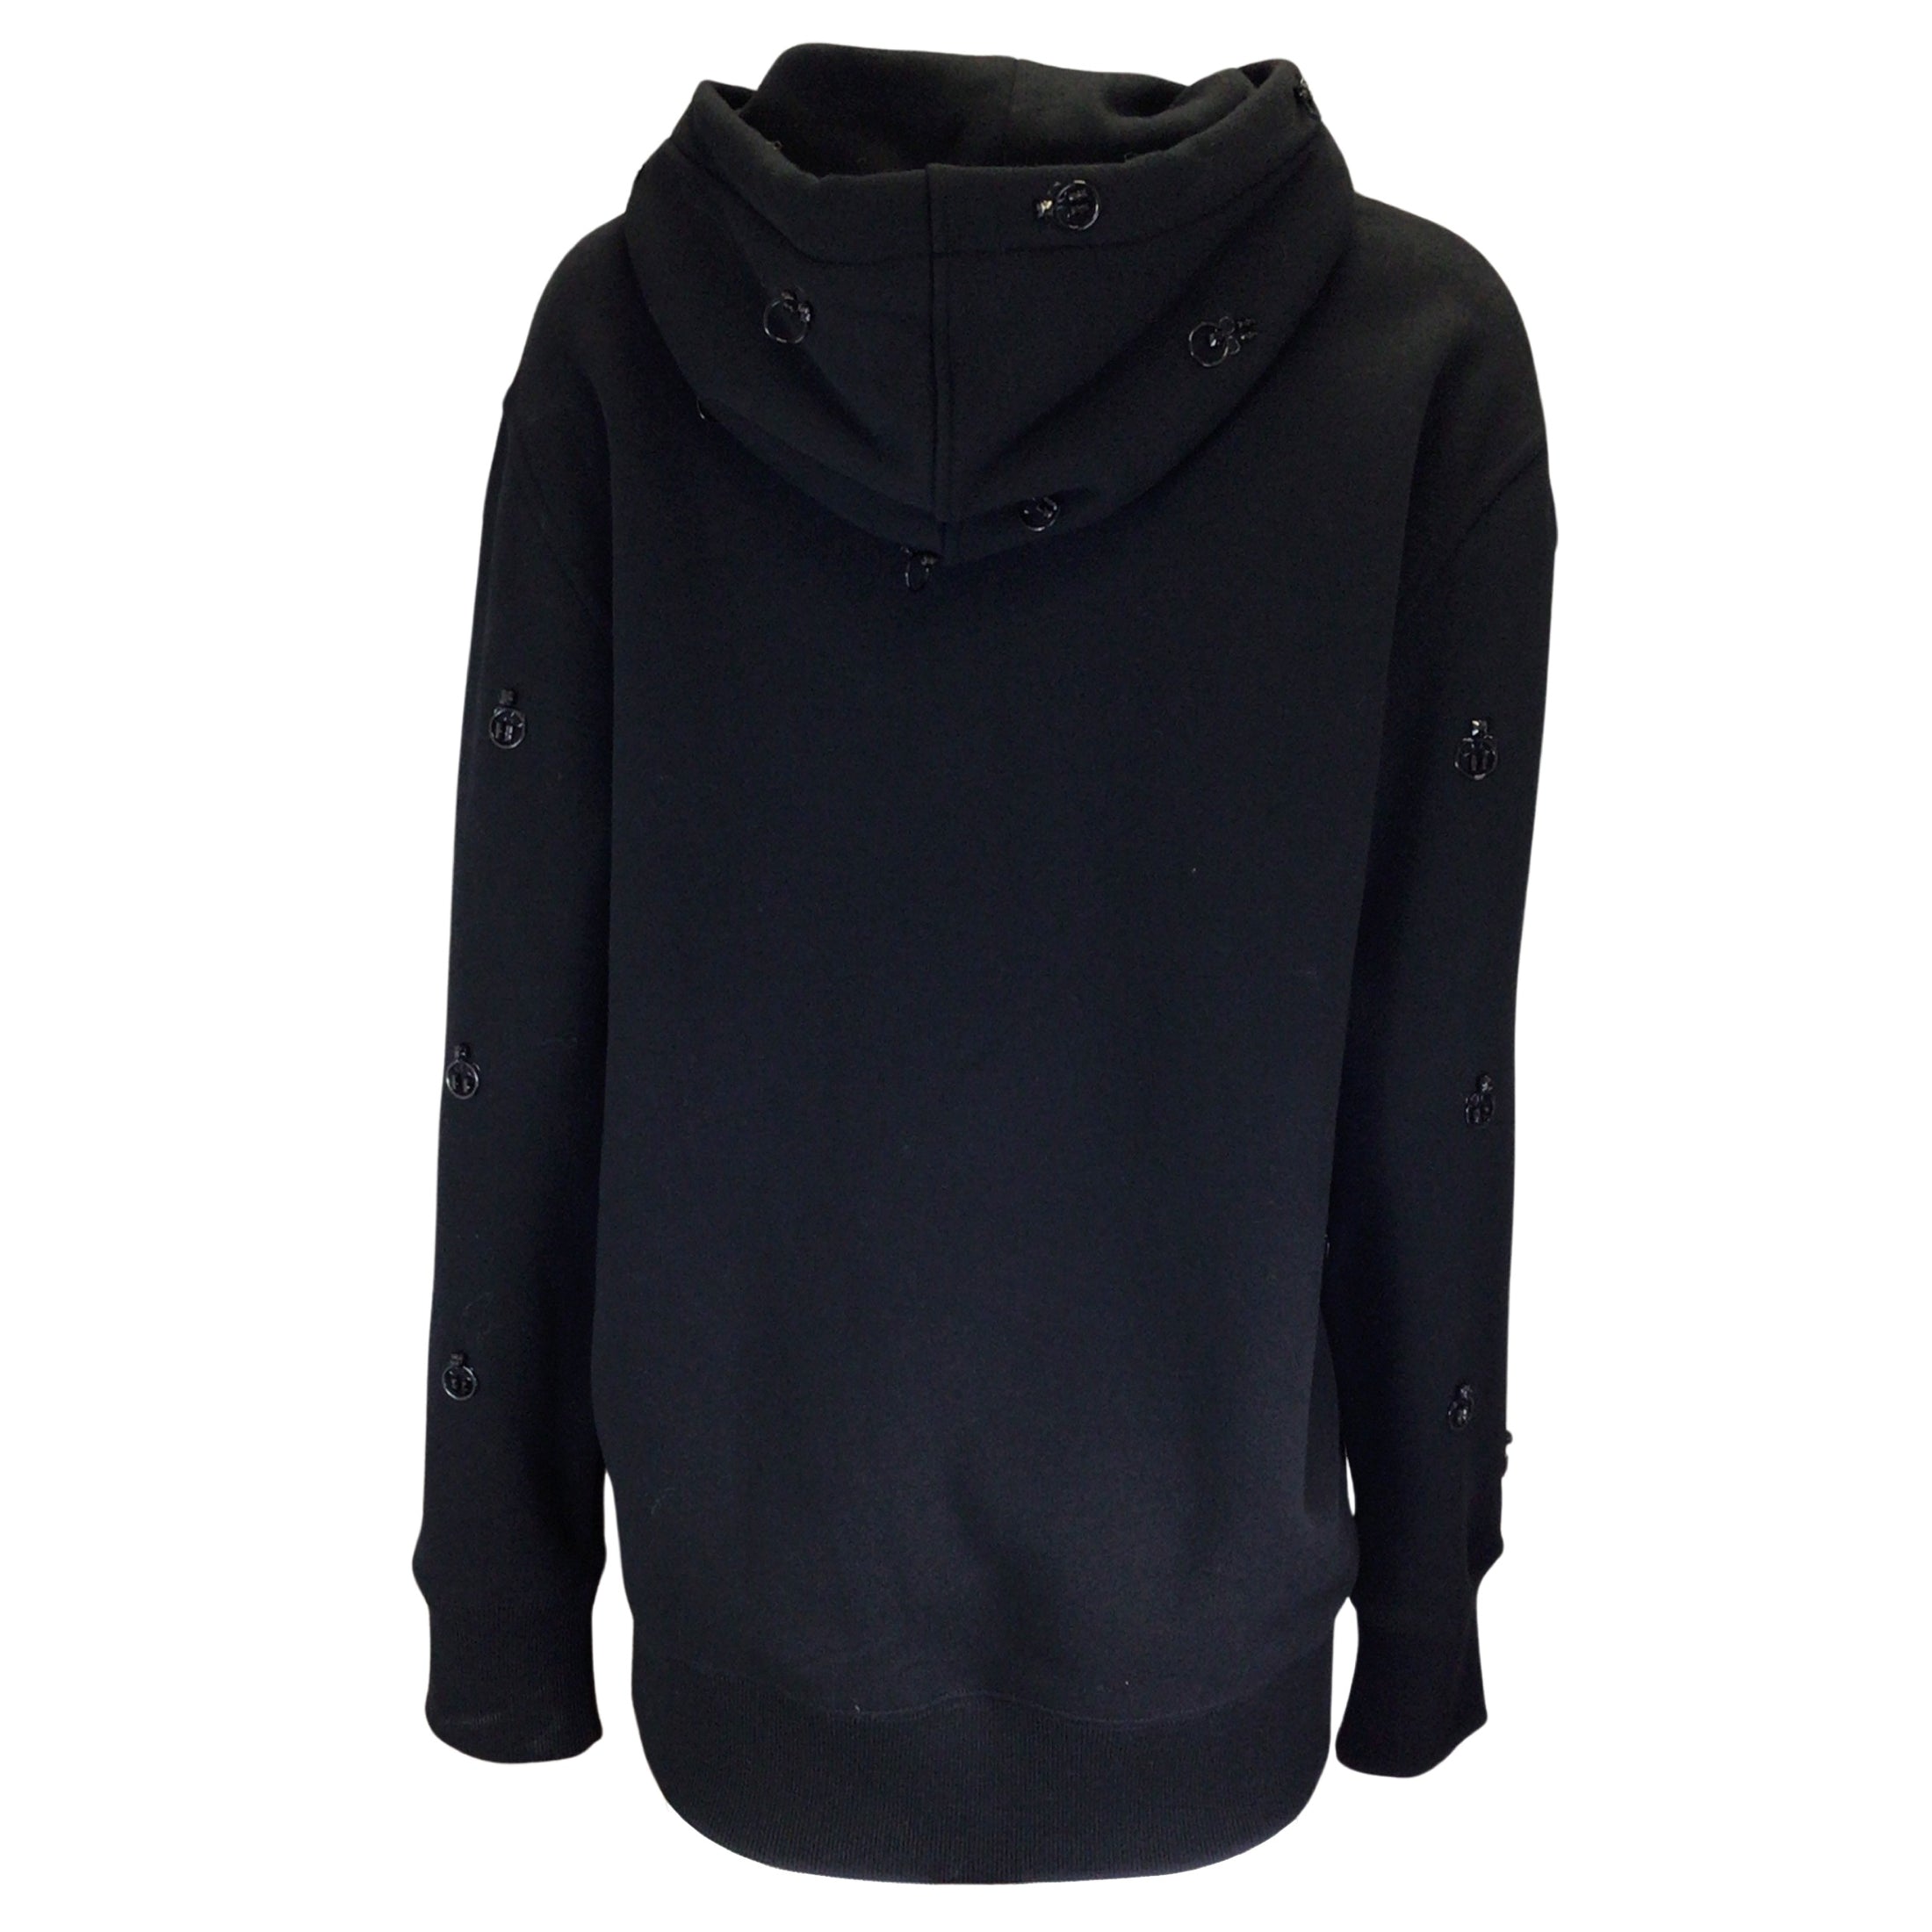 Givenchy Black Metal Embellished Hooded Classic Fit Cotton Sweatshirt